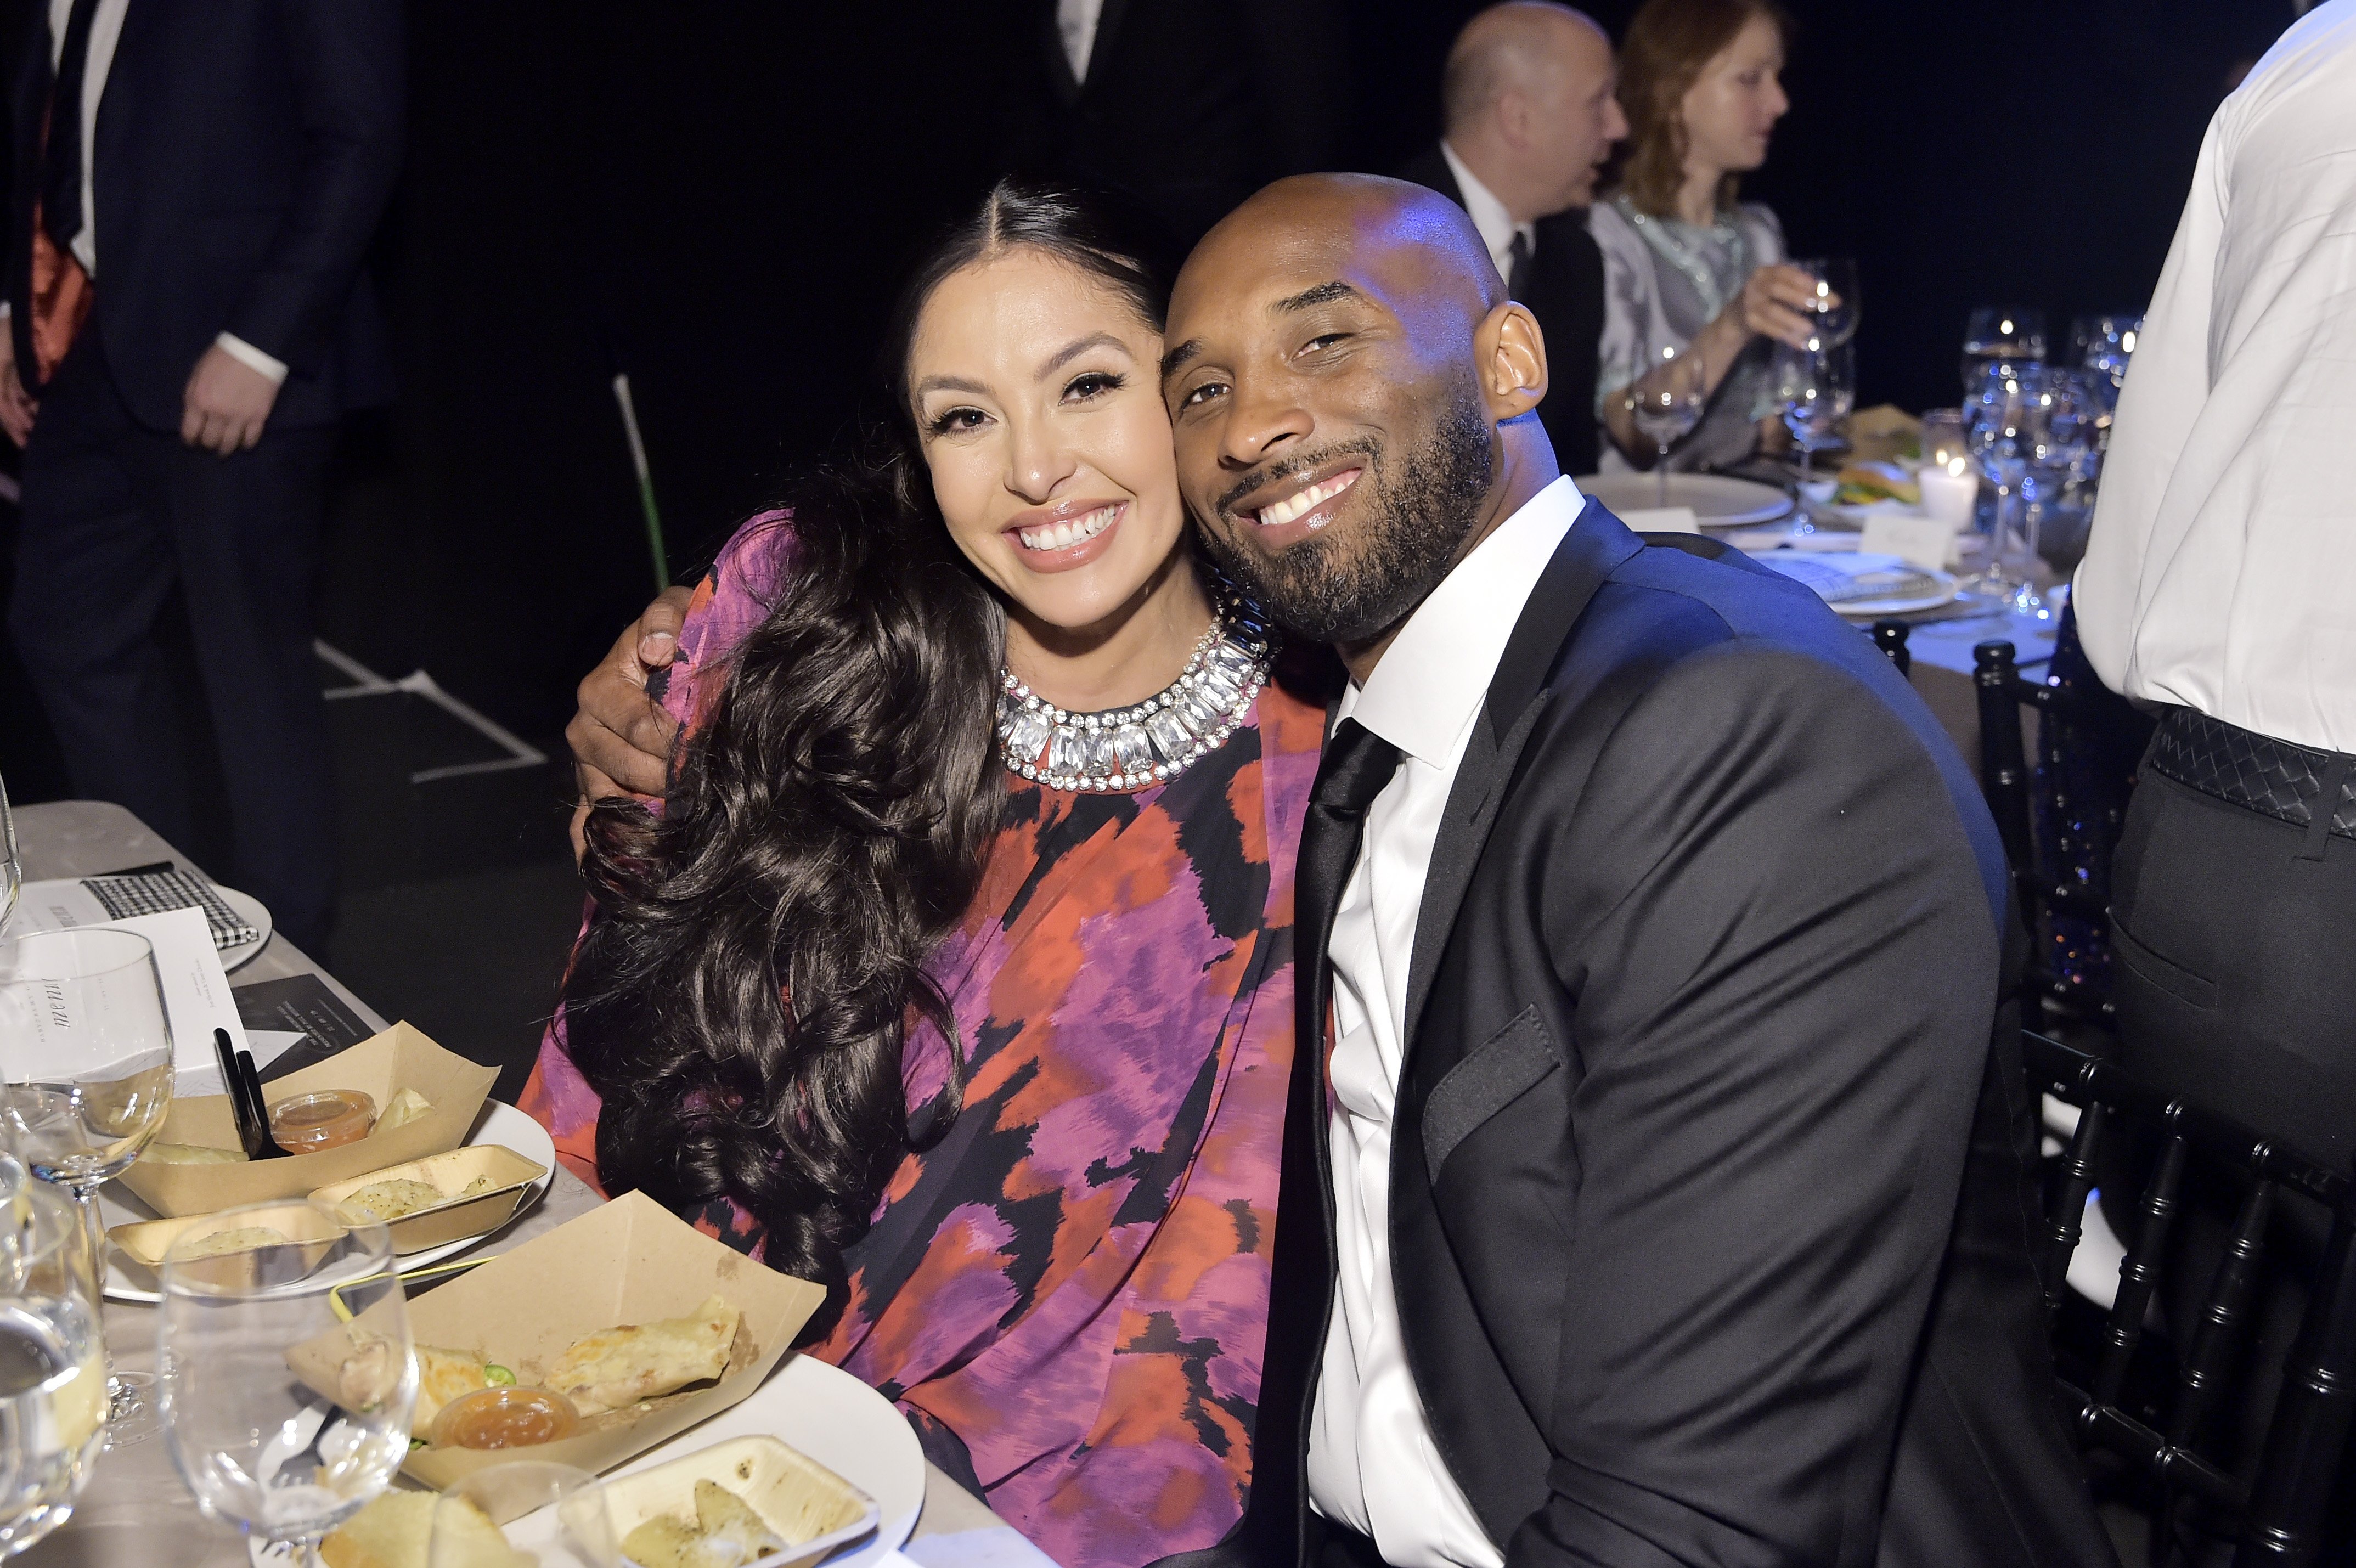 Vanessa Laine Bryant and Kobe Bryant attend the 2019 Baby2Baby Gala on November 09, 2019, in Los Angeles, California. | Source: Getty Images.